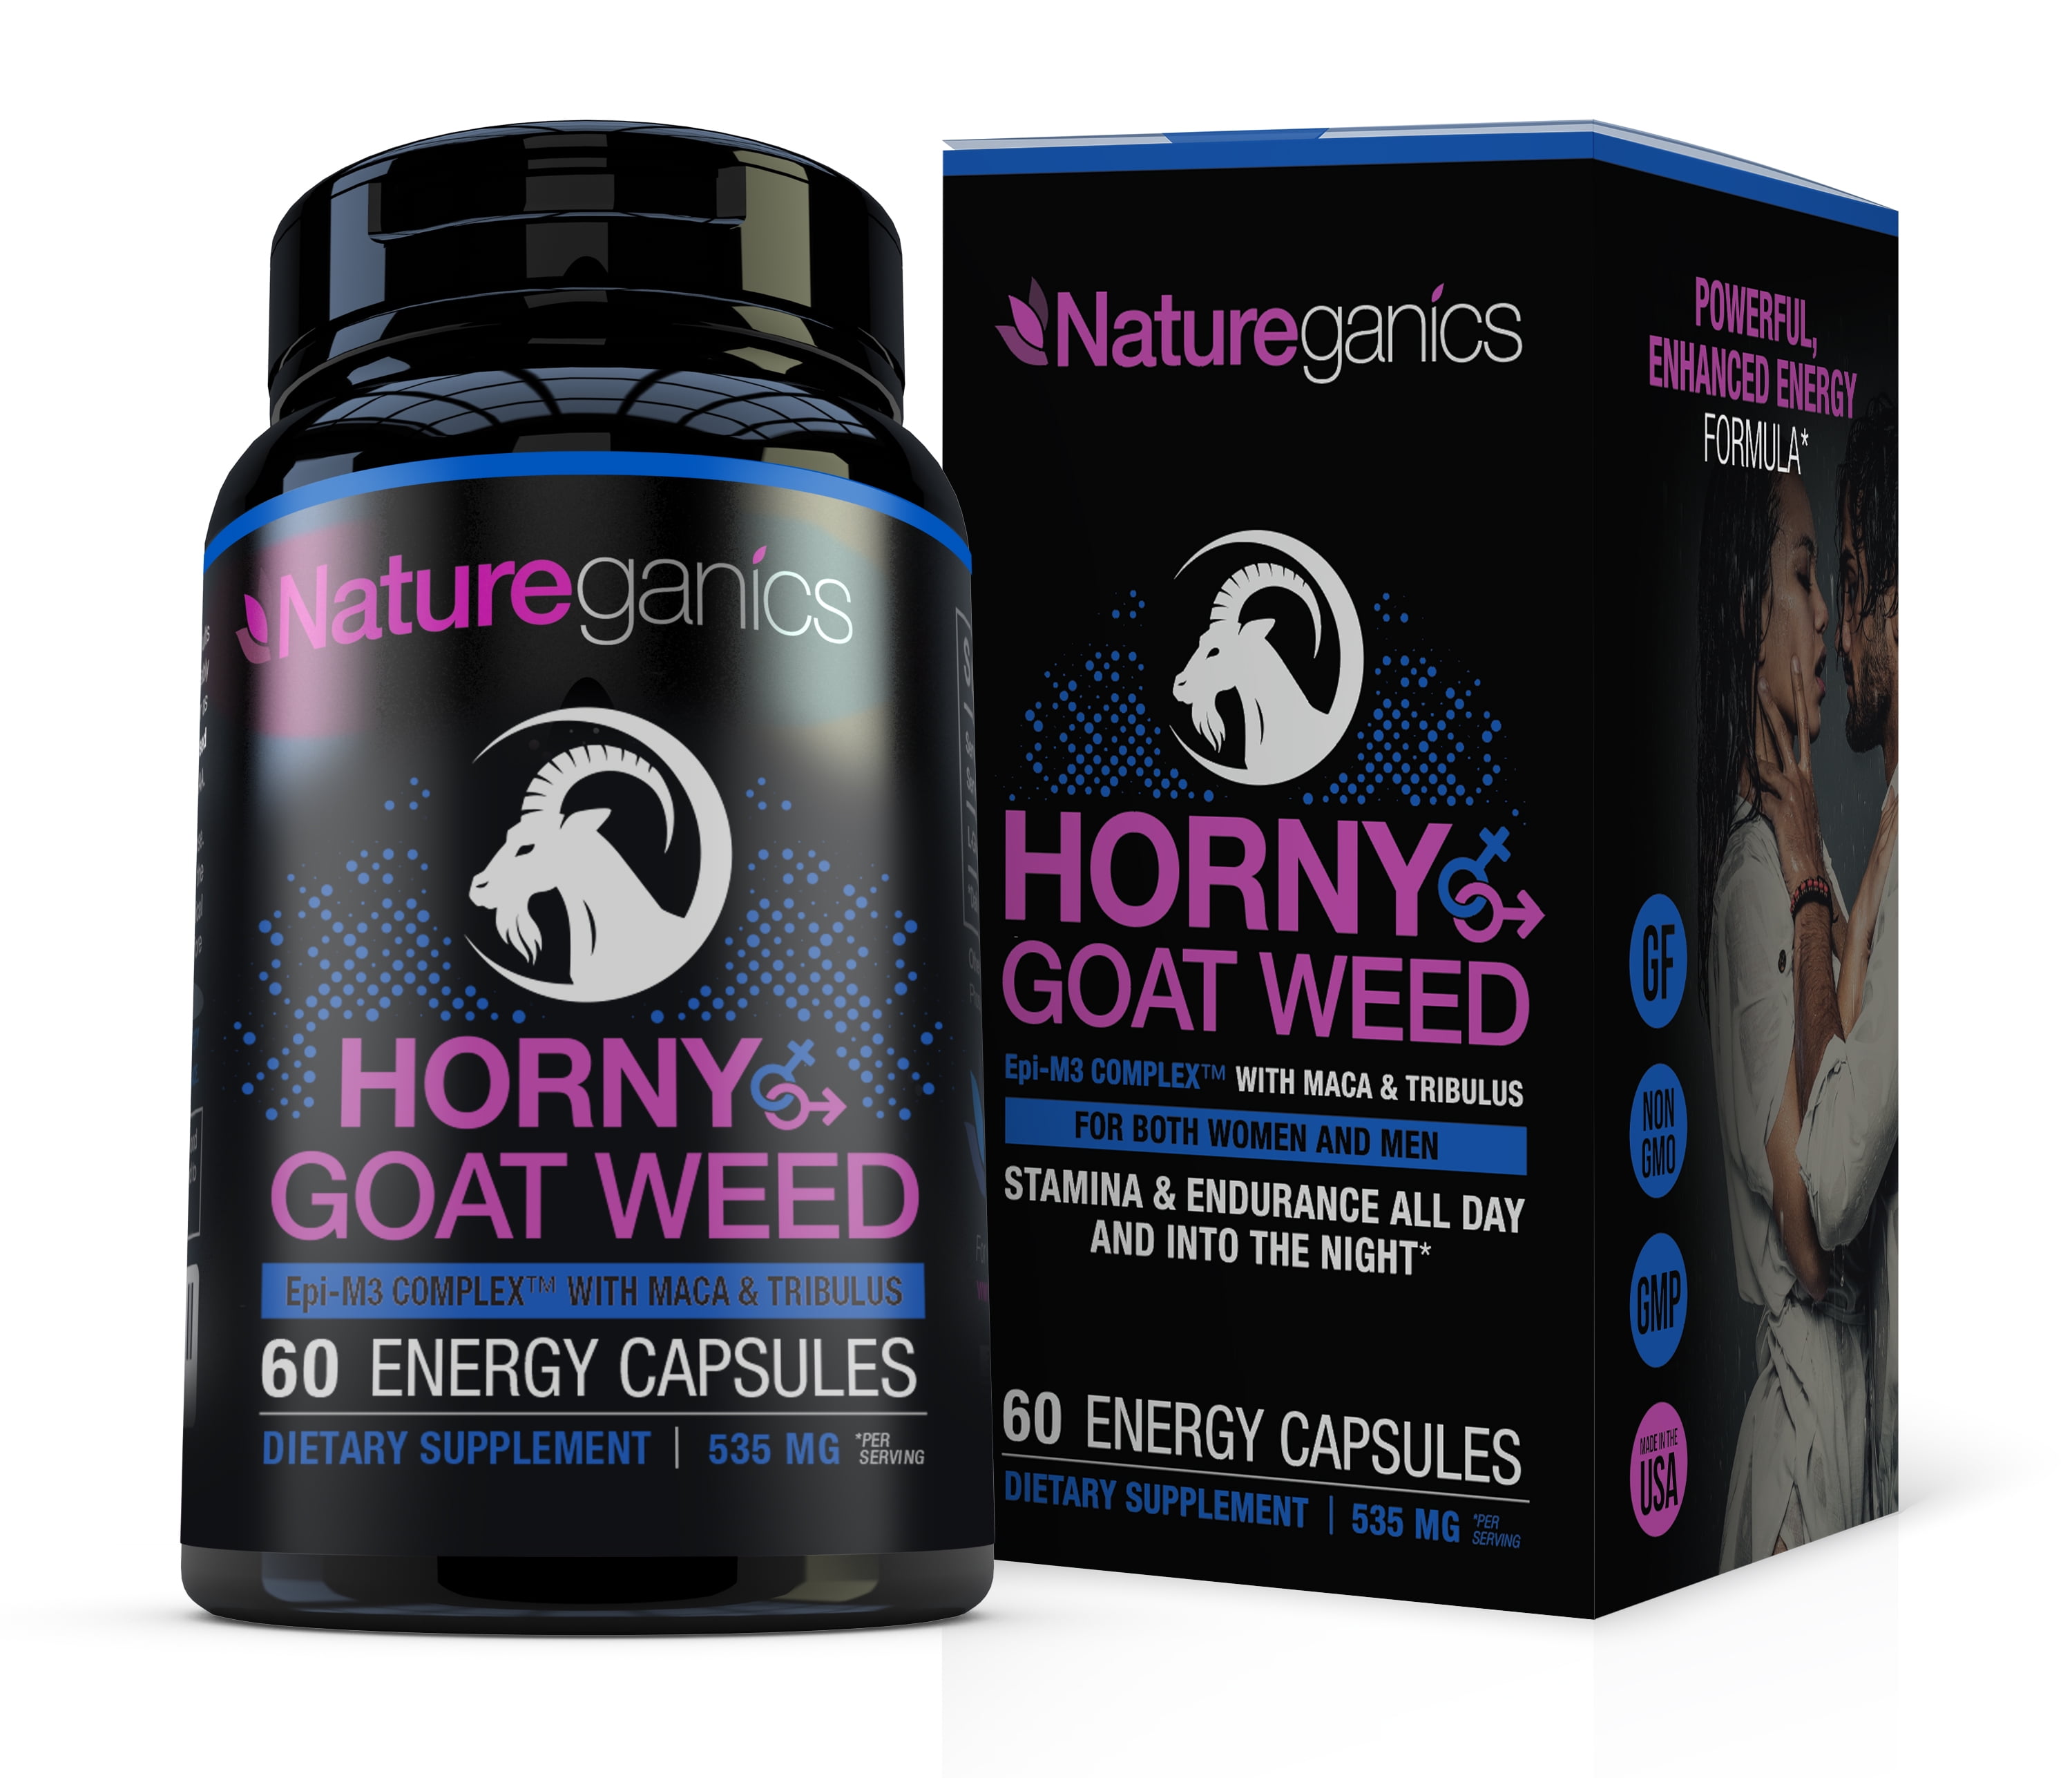 Natureganics Horny Goat Weed with Maca and Tribulus will provide you with a...